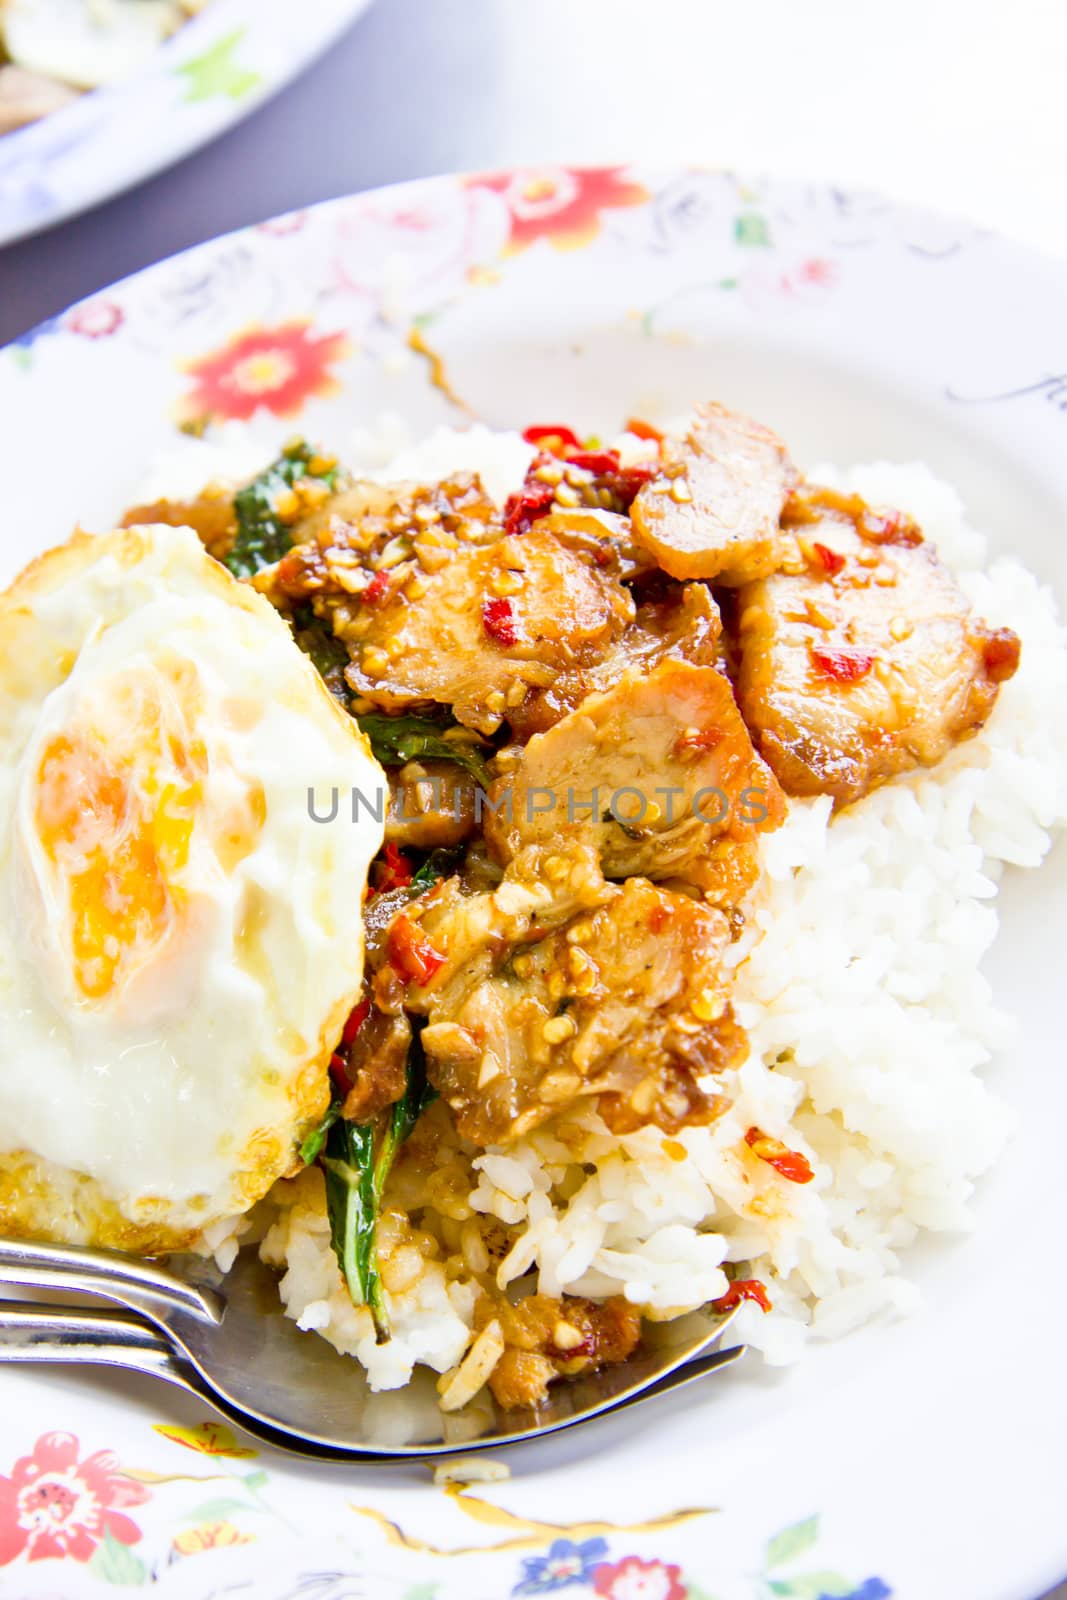 spicy pork with fired egg and rice